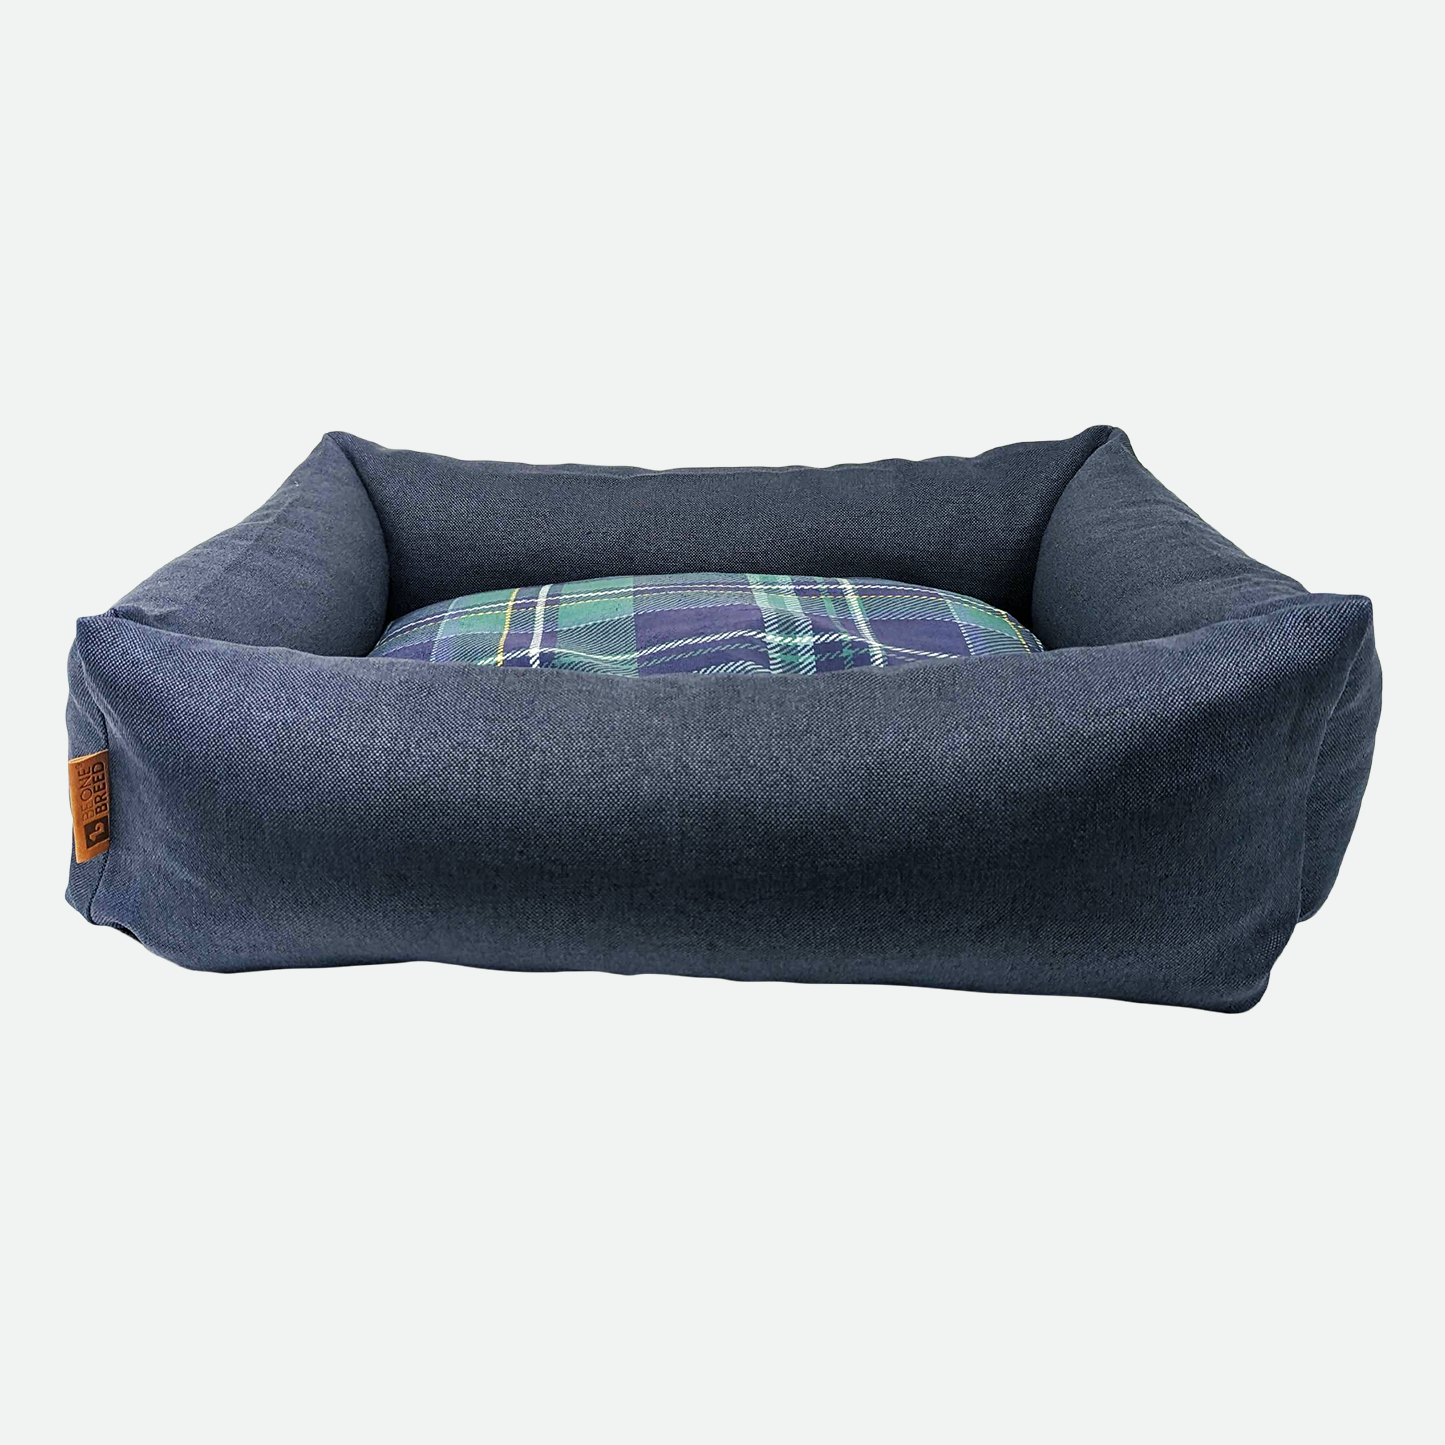 Memory foam pet bed with padded sides, varsity plaid